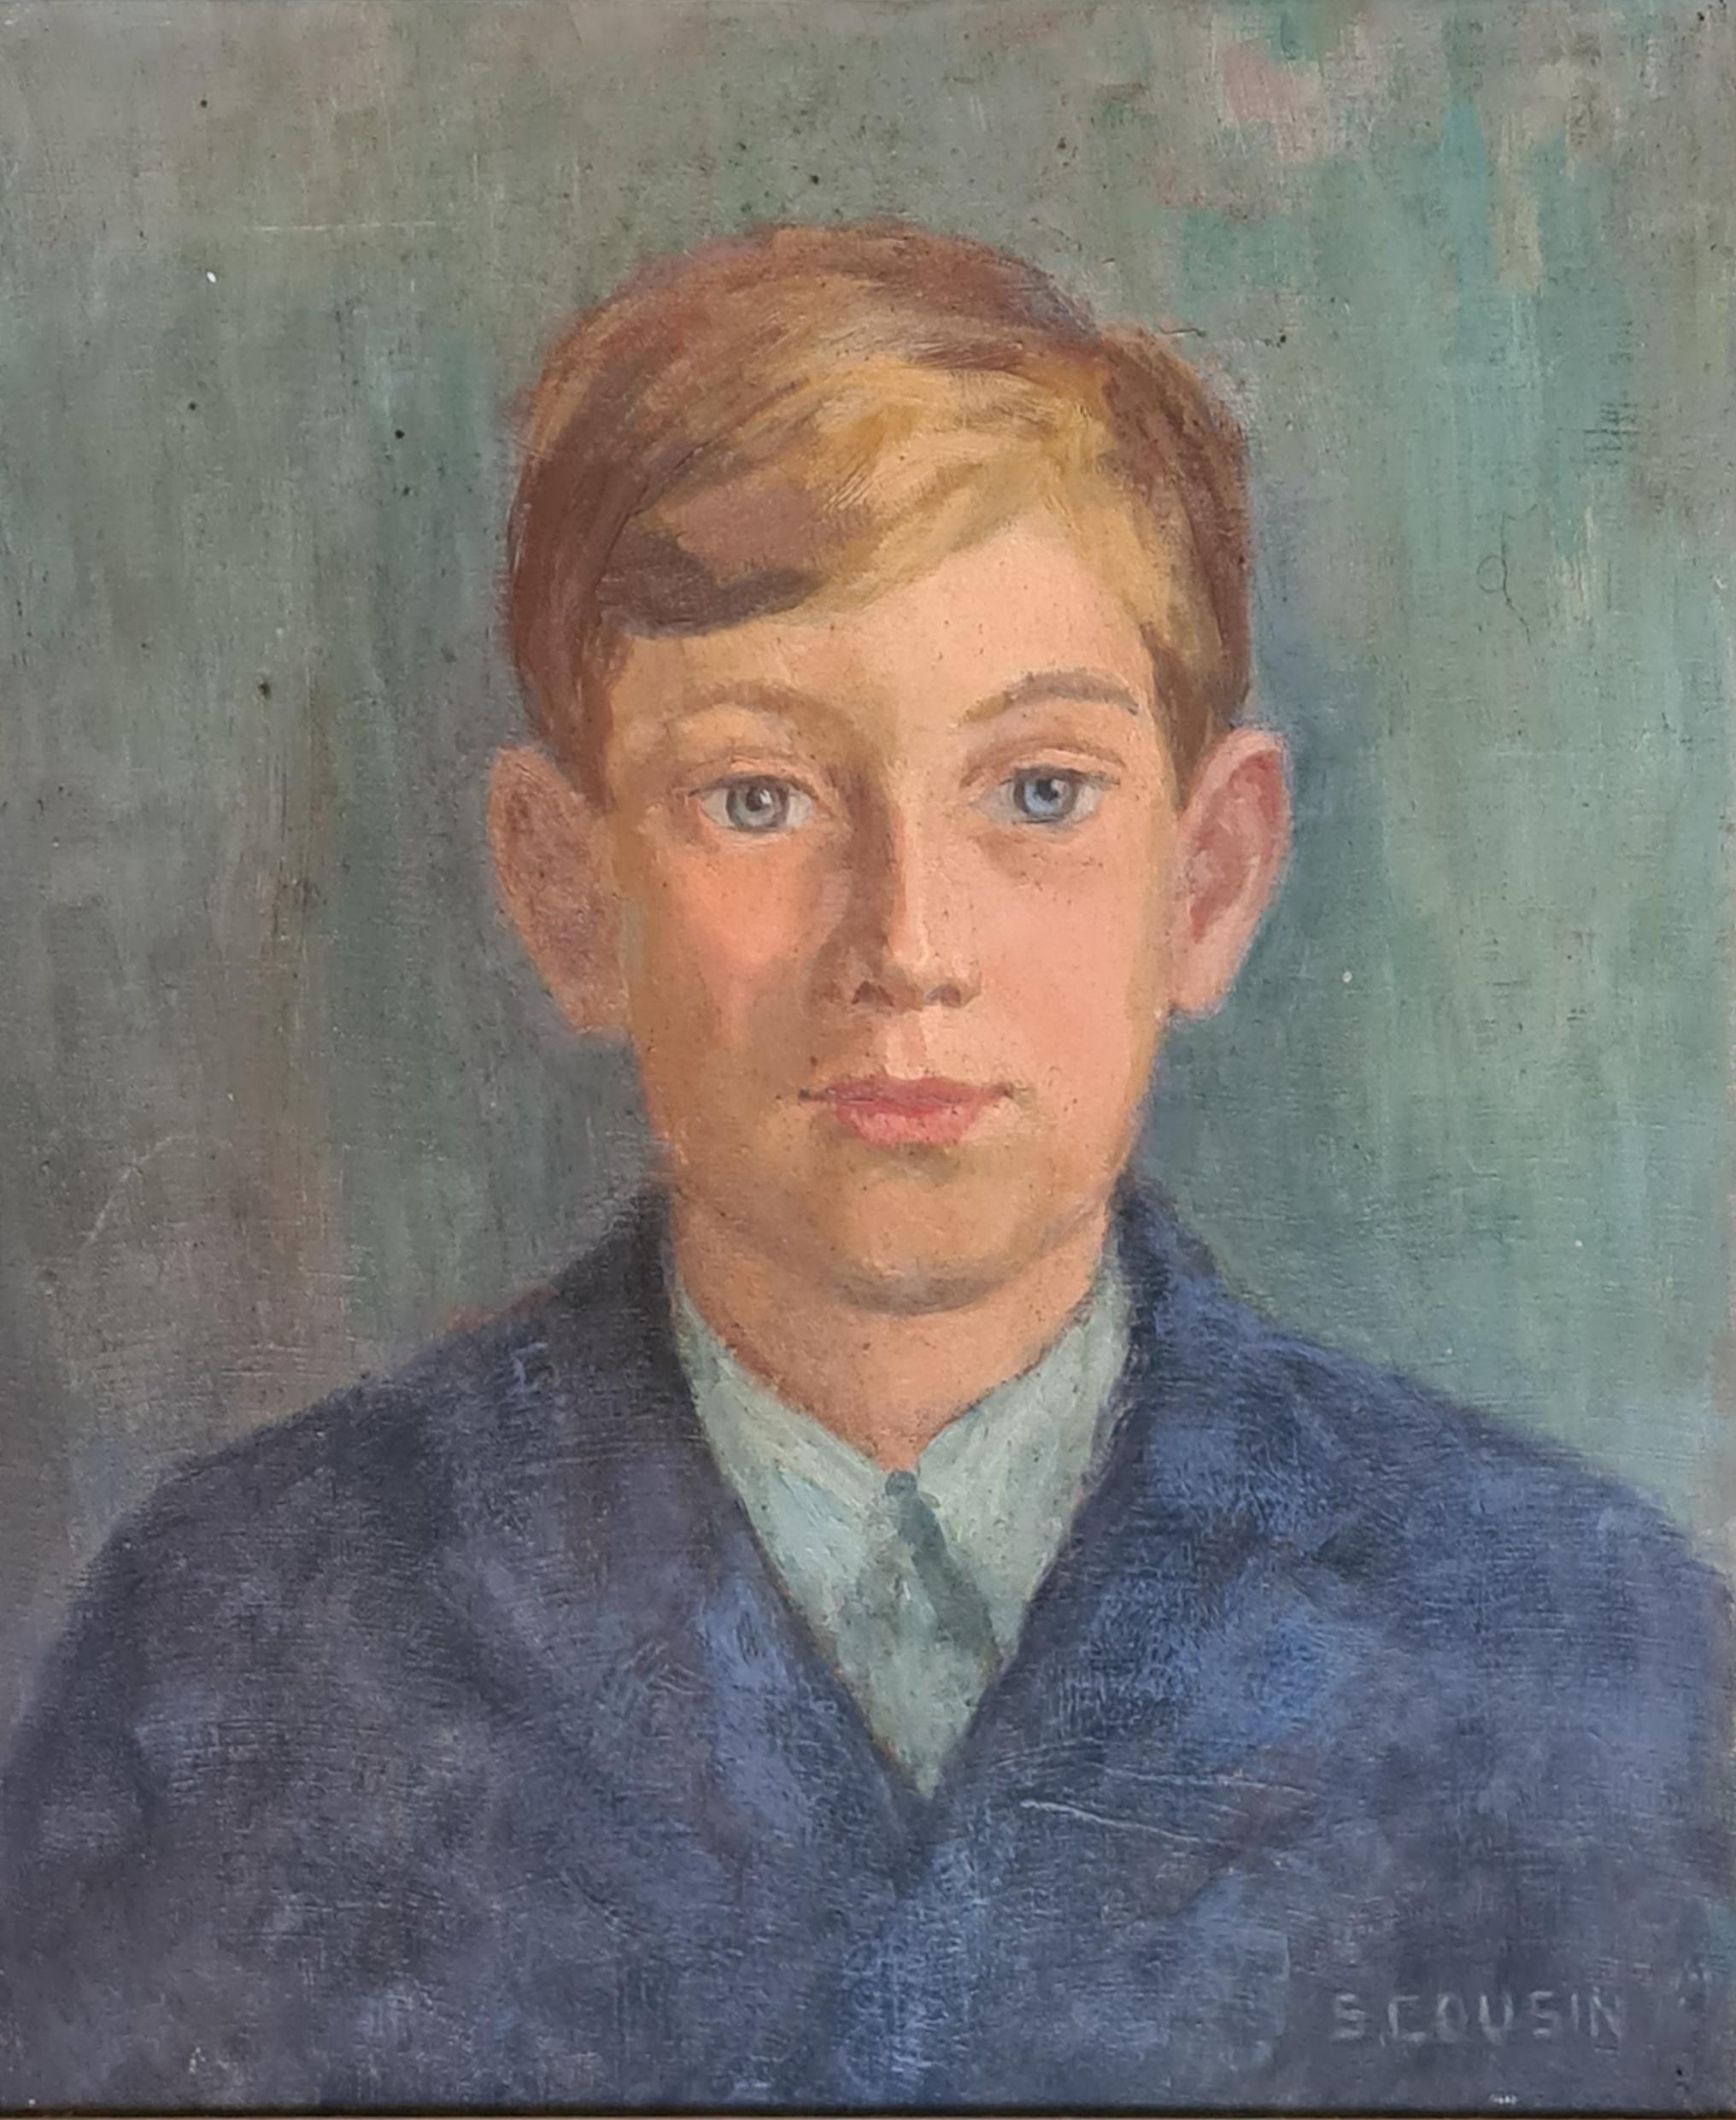 1930s Oil on canvas portrait by S Cousin. The painting is signed bottom right and the subject 'Henri Cousin' titled on the back of the canvas.

An engaging and charming oil portrait of Henri Cousin. The artist has captured the piercing blue eyes of